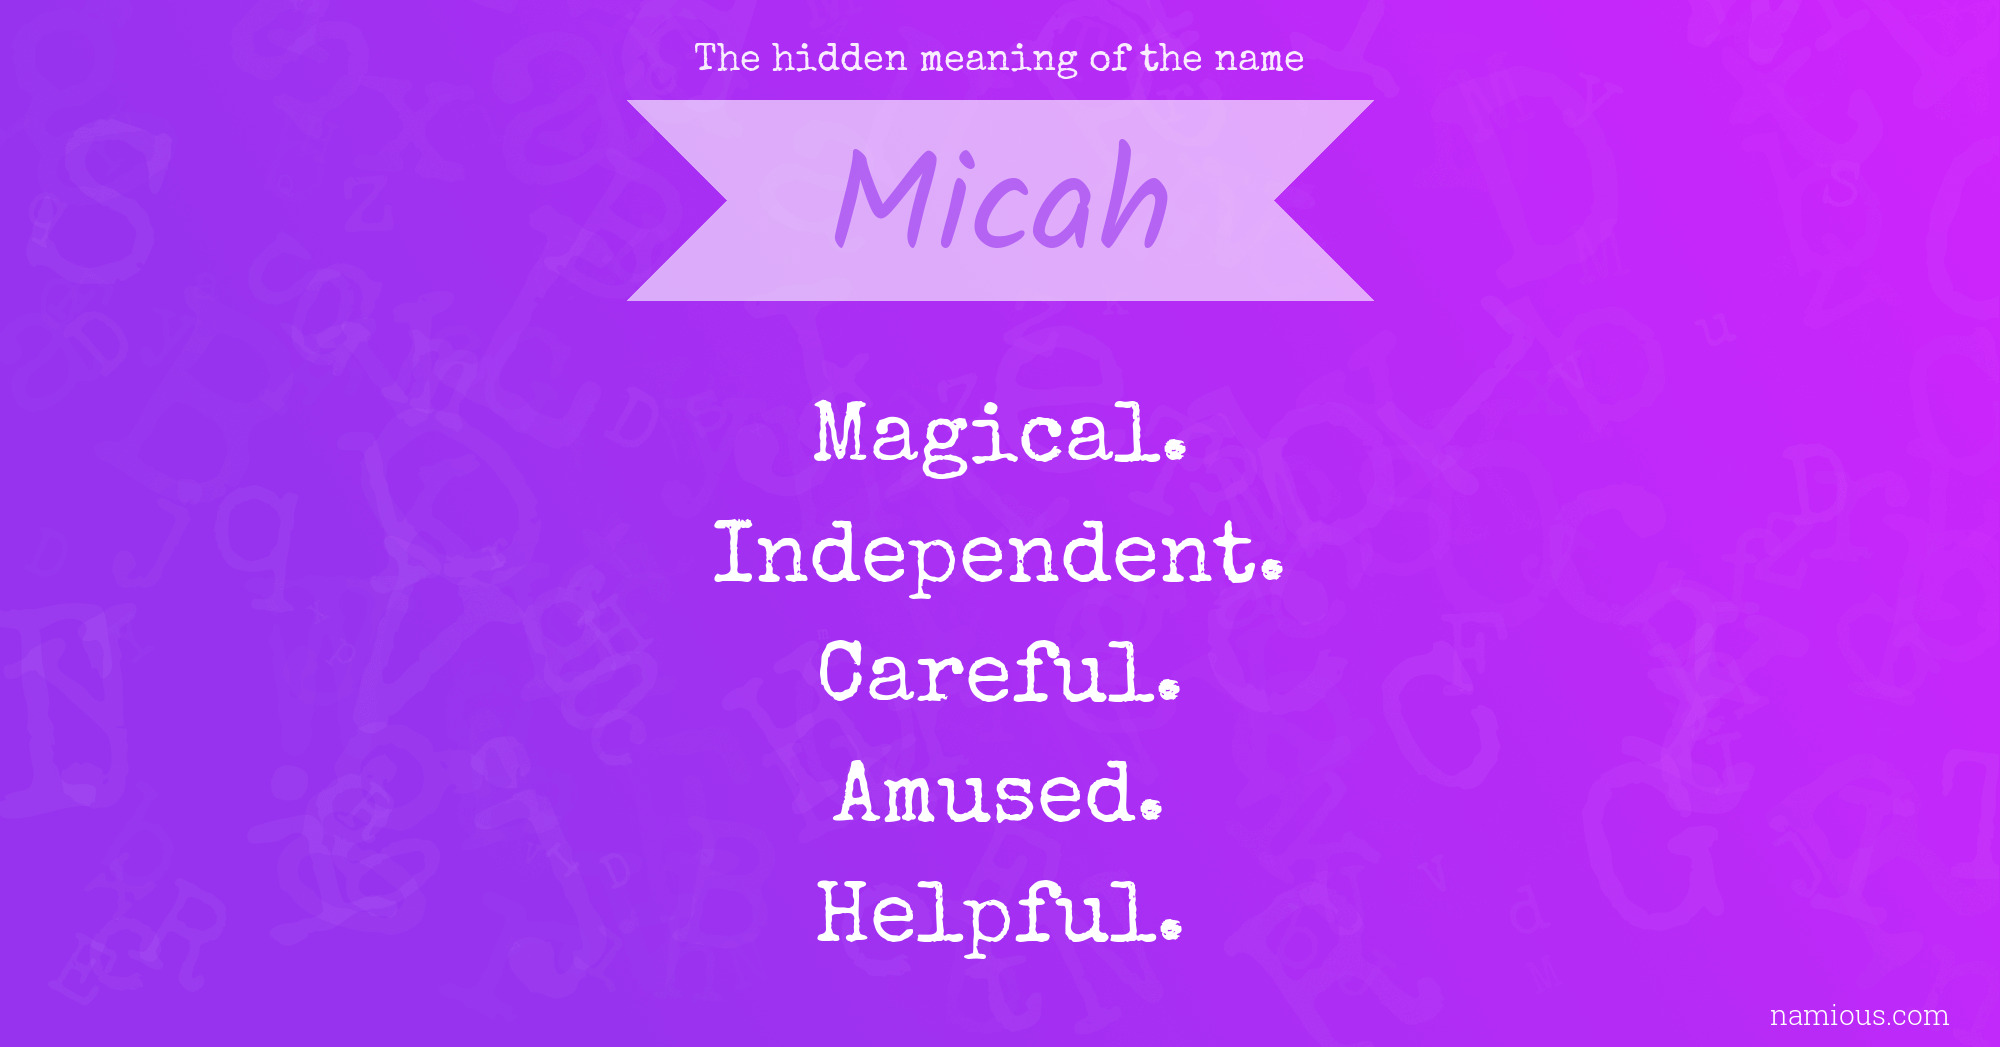 The hidden meaning of the name Micah